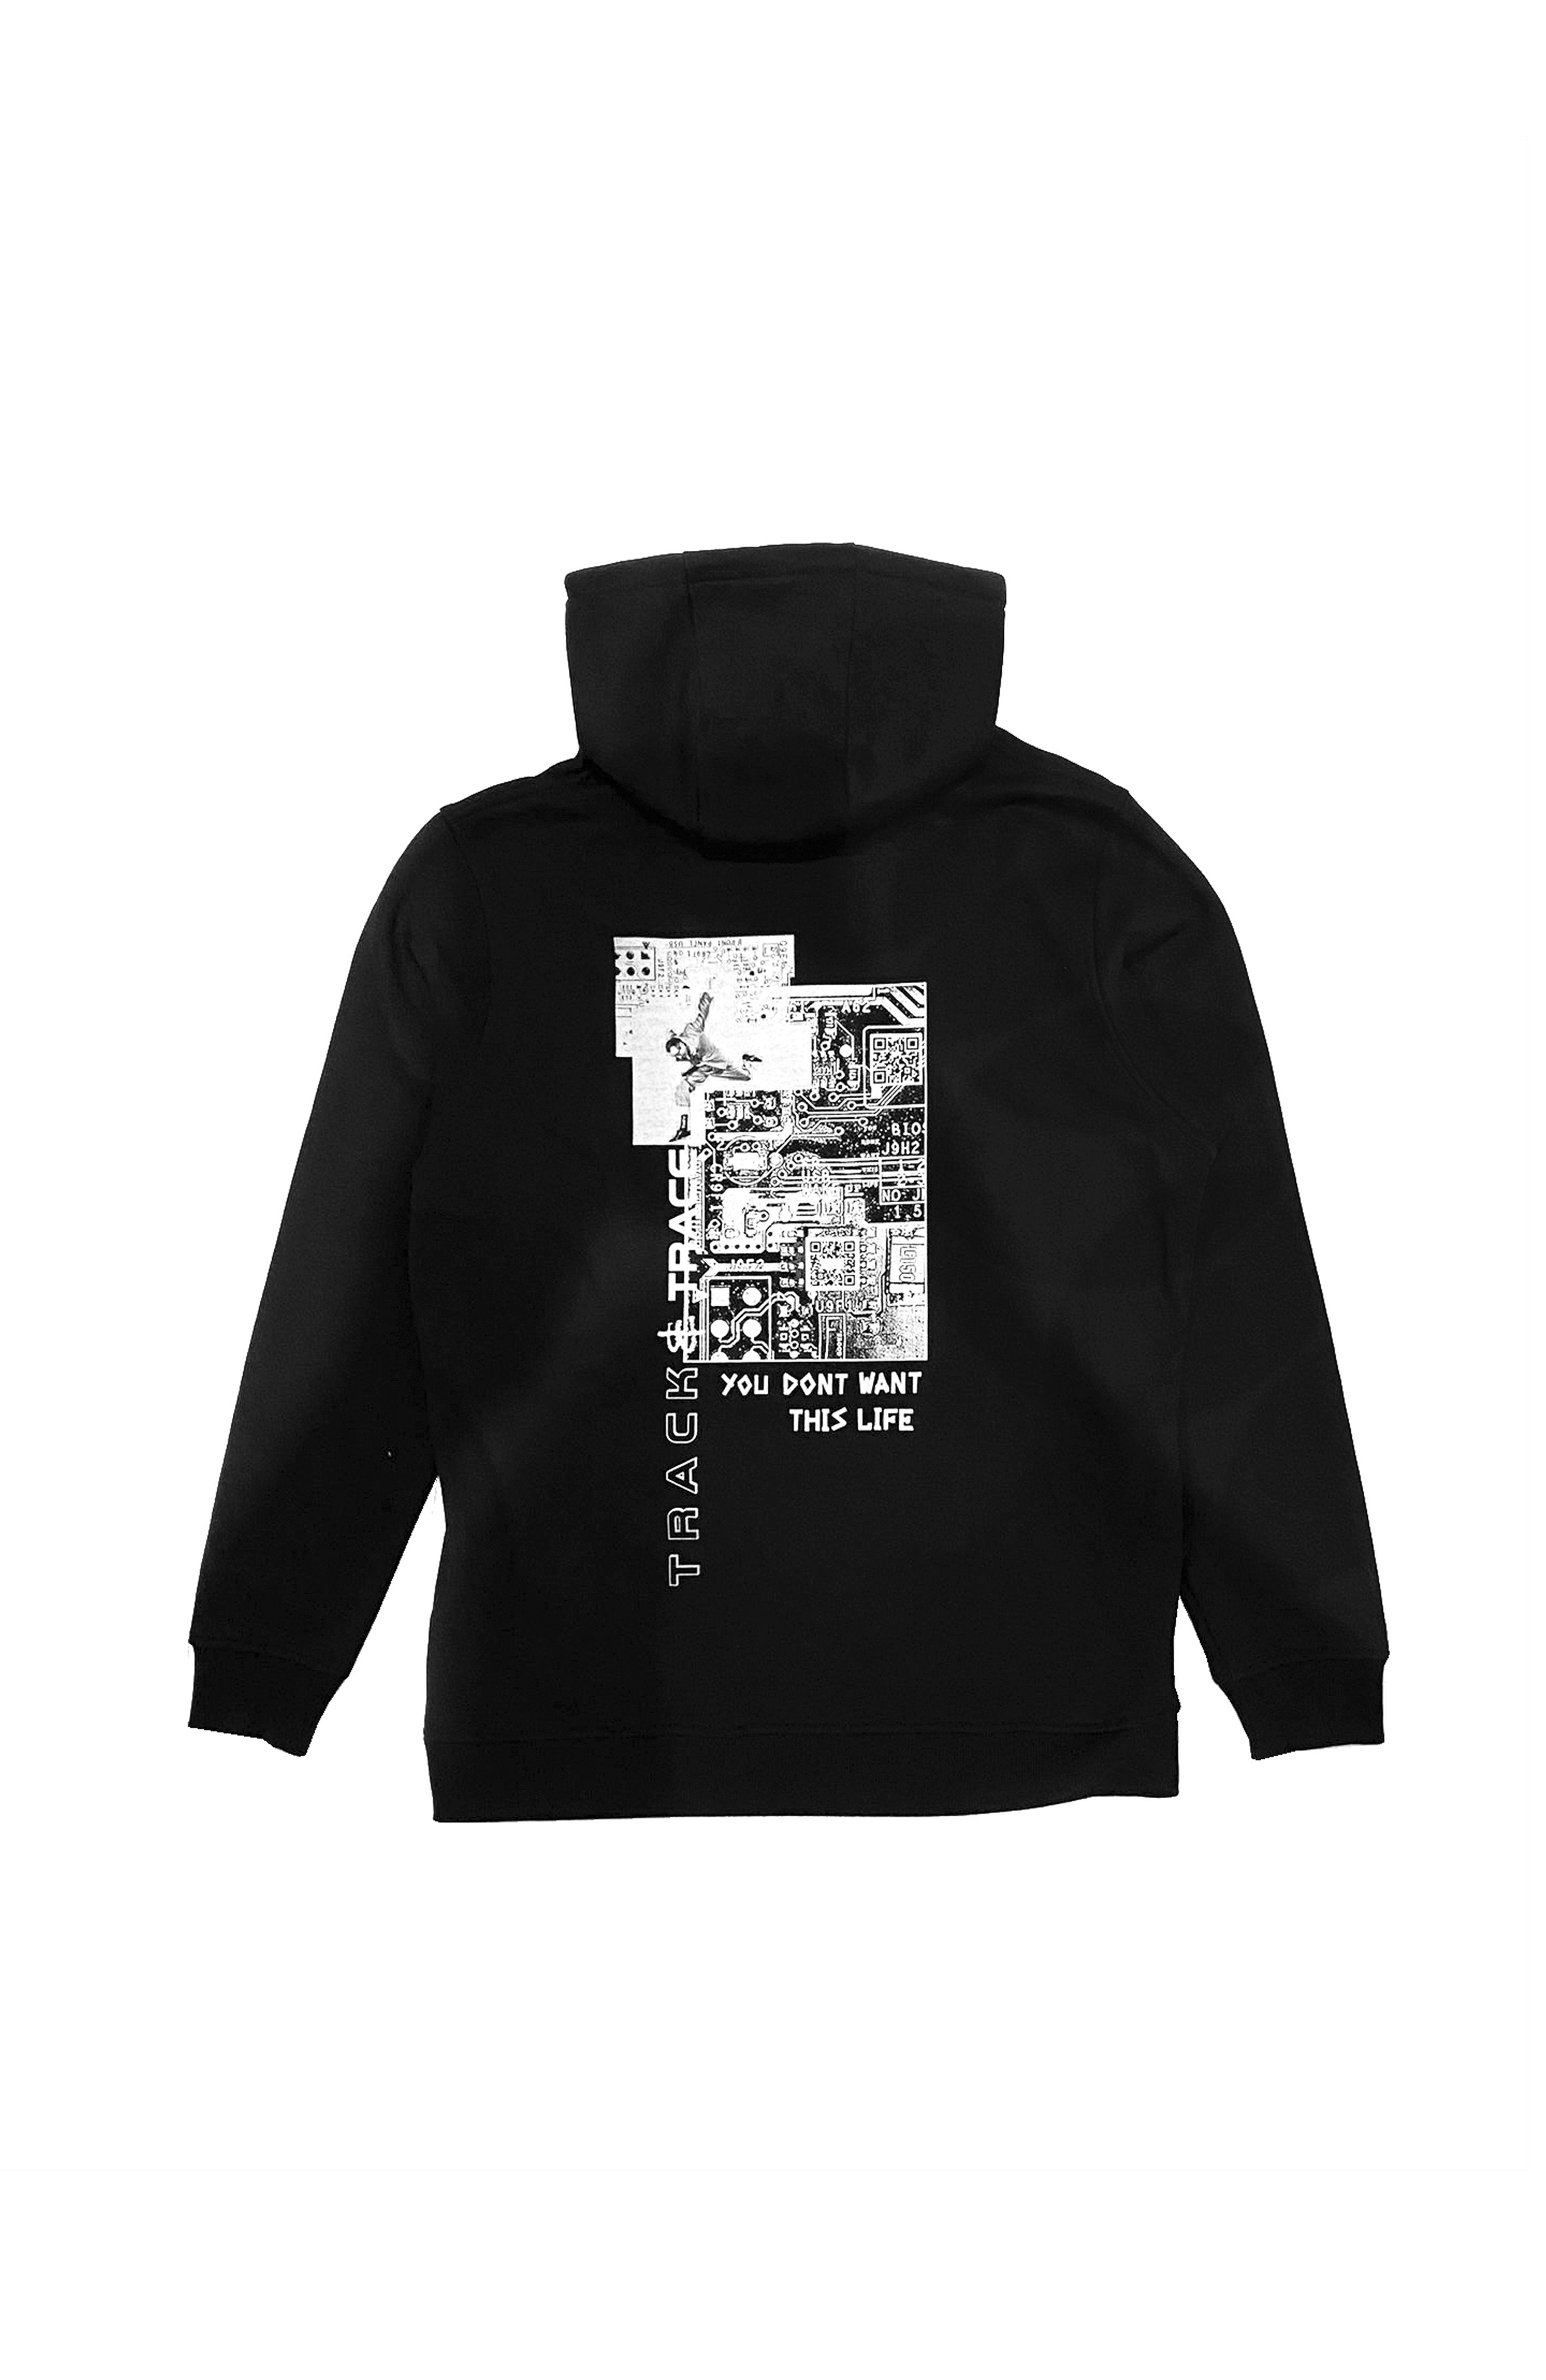 Track & Trace Hoodie - YDWTL